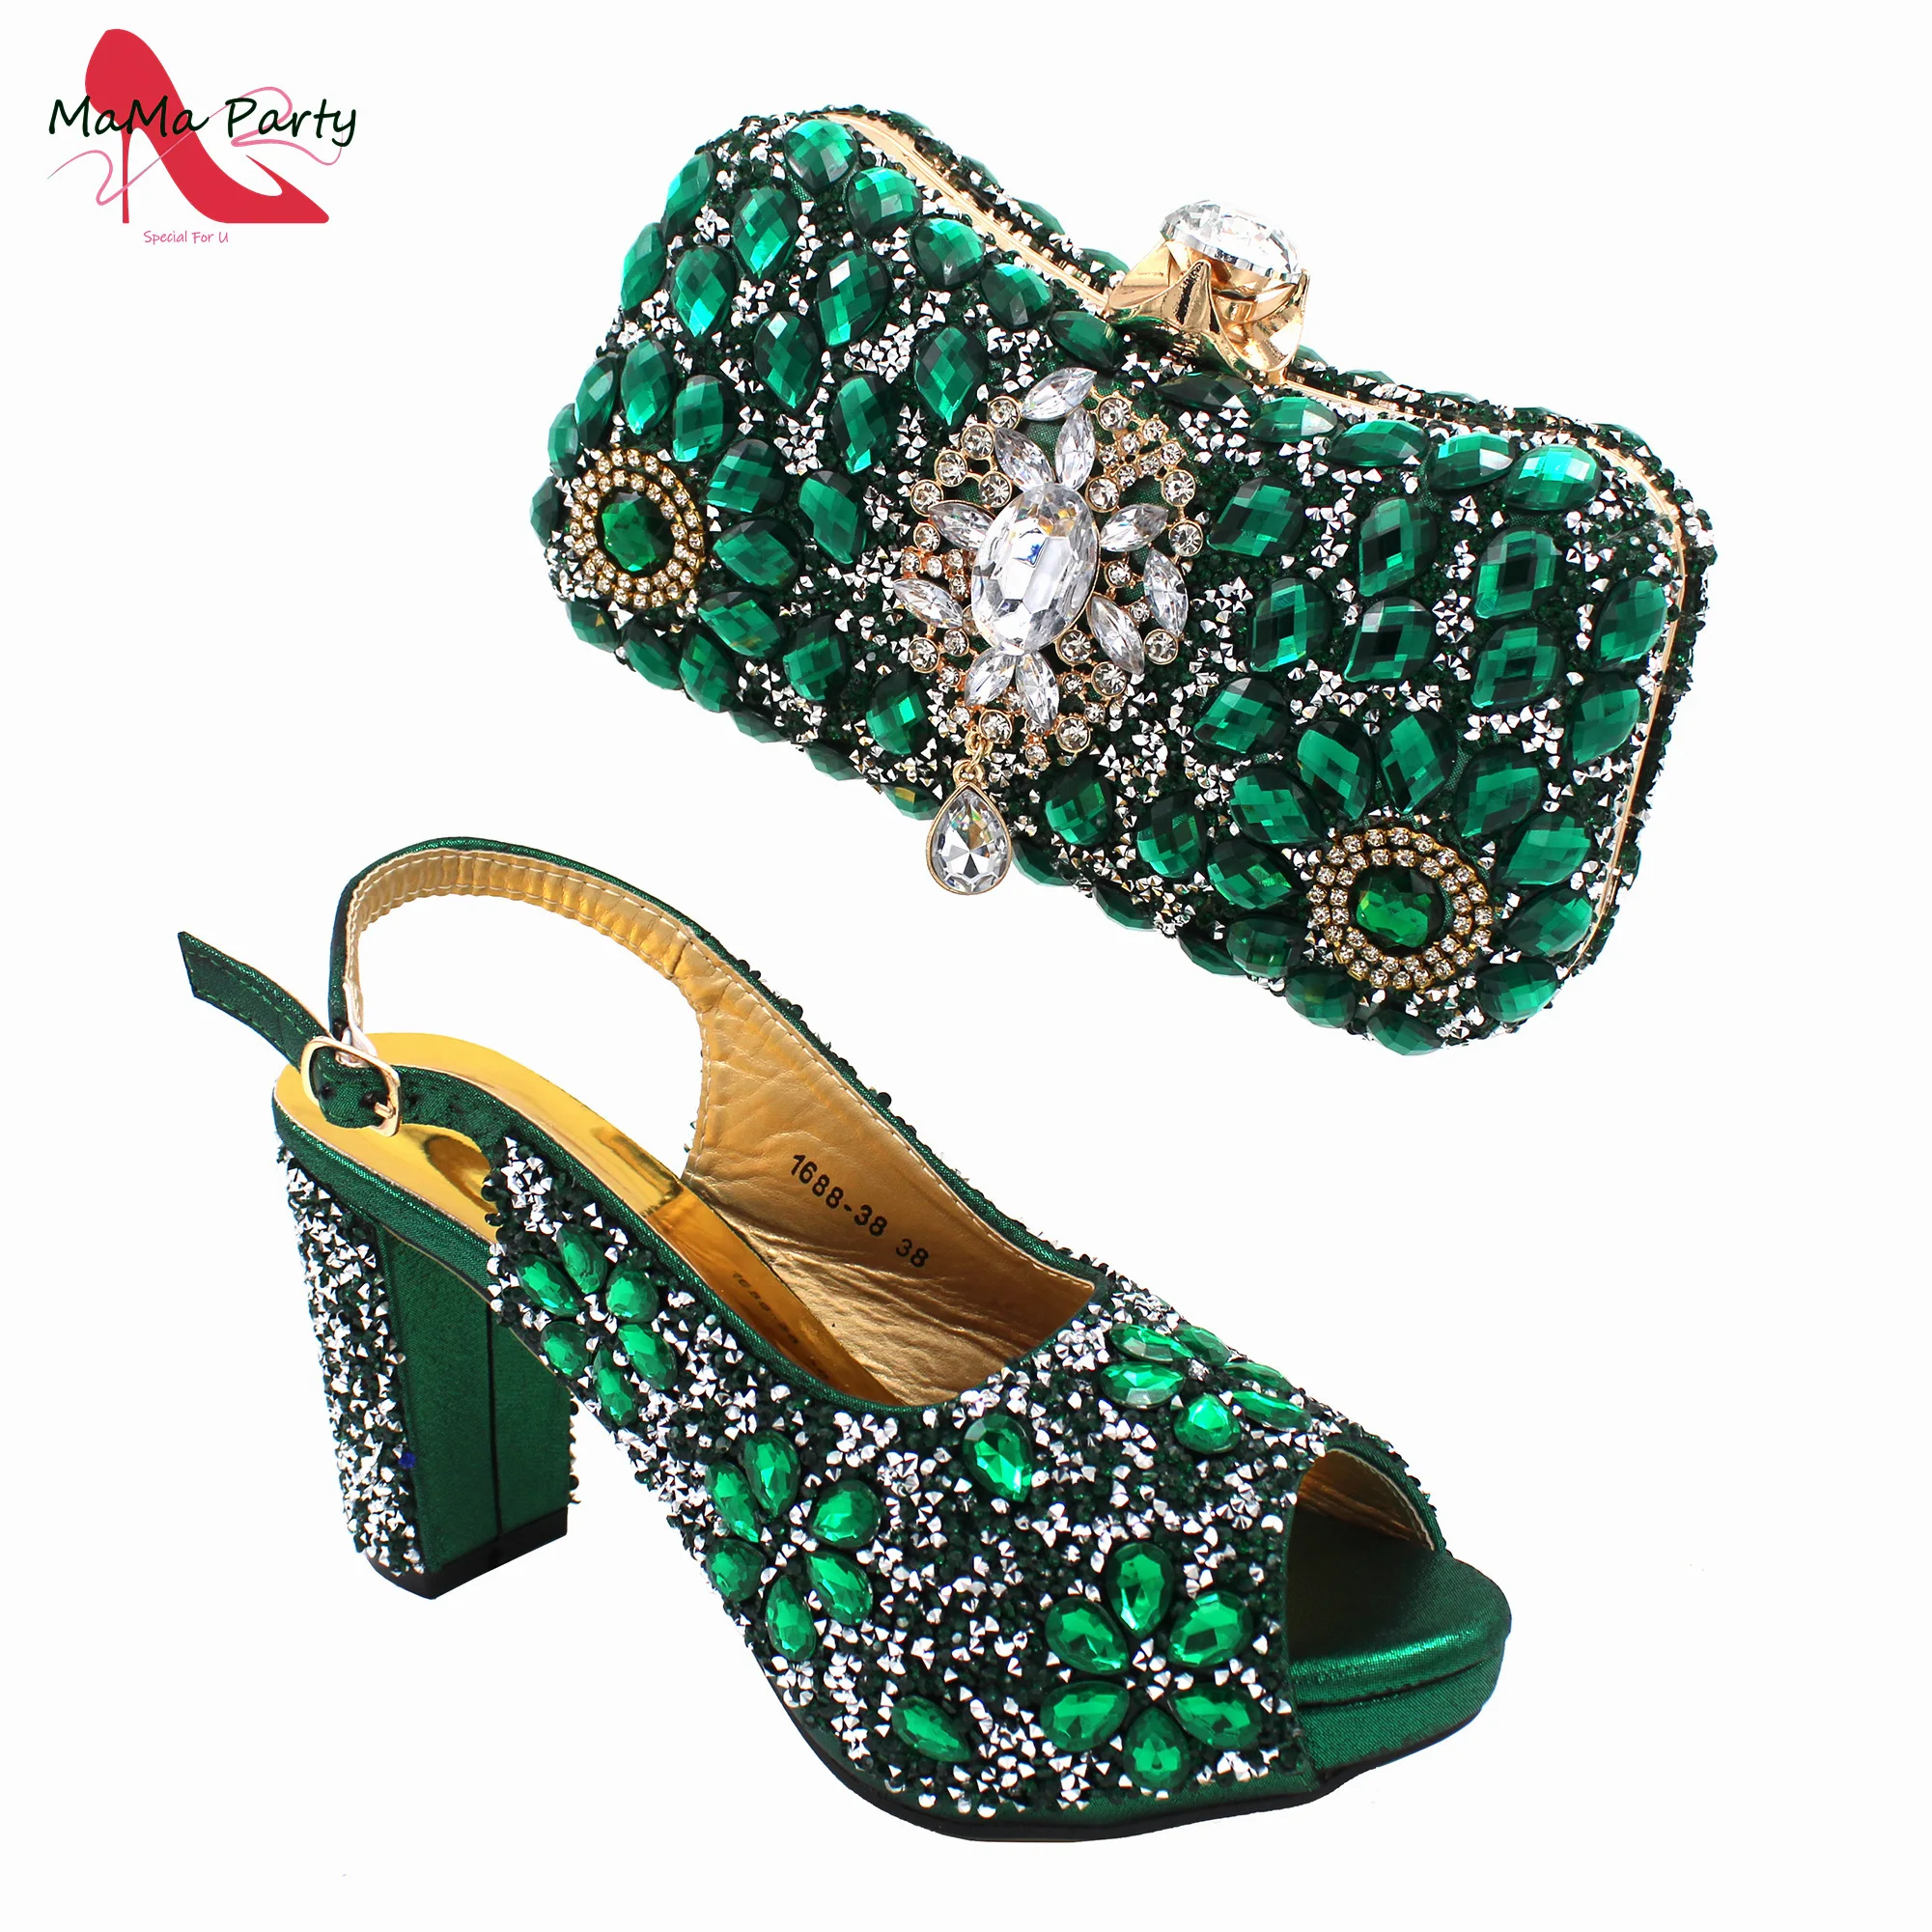 

Spring New Arrivals Hot Sale INS Design Italian Women Shoes Matching Bag in Green Color Decorate with Crystal for Party